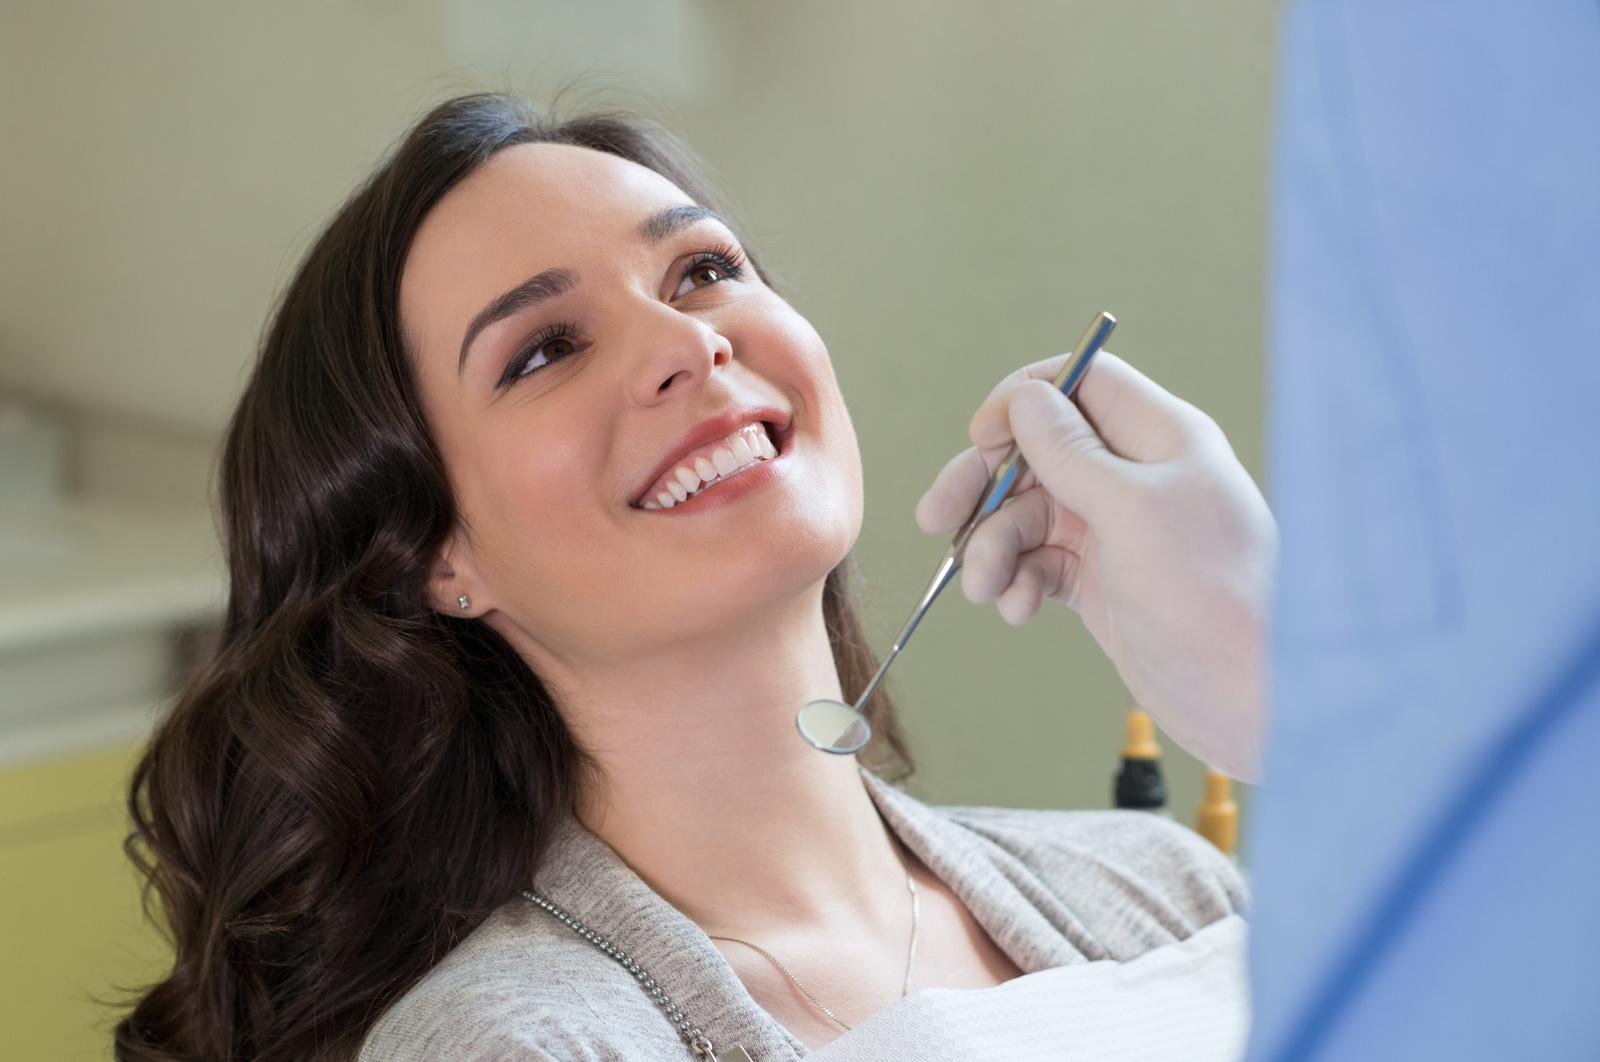 Which Treatments Does Smile Design Include?